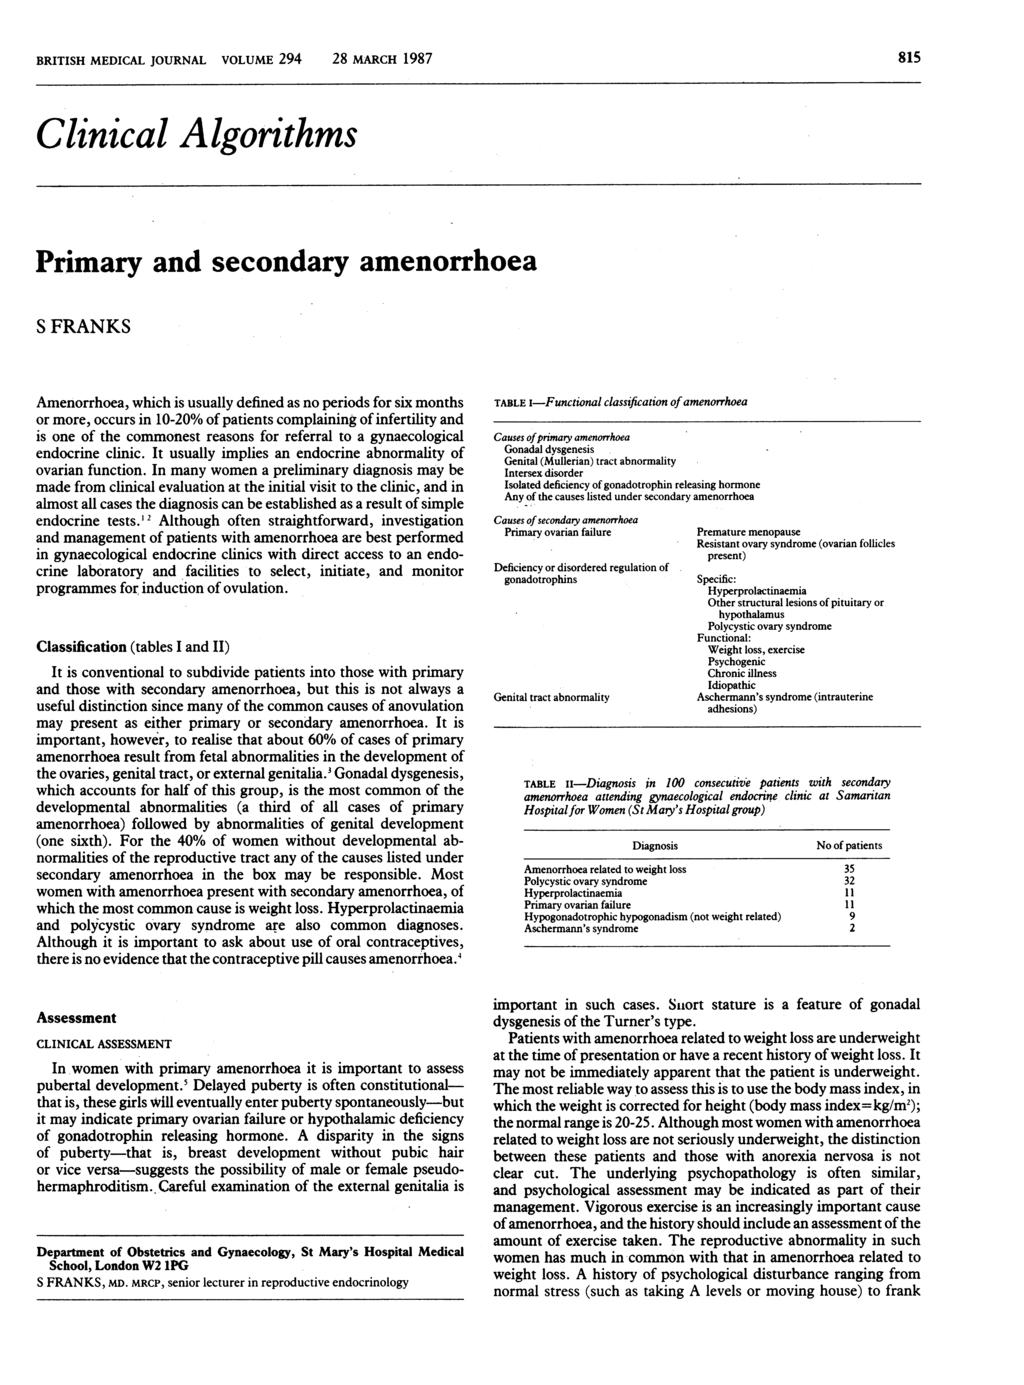 BRITISH MEDICAL JOURNAL VOLUME 294 28 MARCH 1987 815 Clinical Aalgorithms Primary and secondary amenorrhoea S FRANKS Amenorrhoea, which is usually defined as no periods for six months or more, occurs